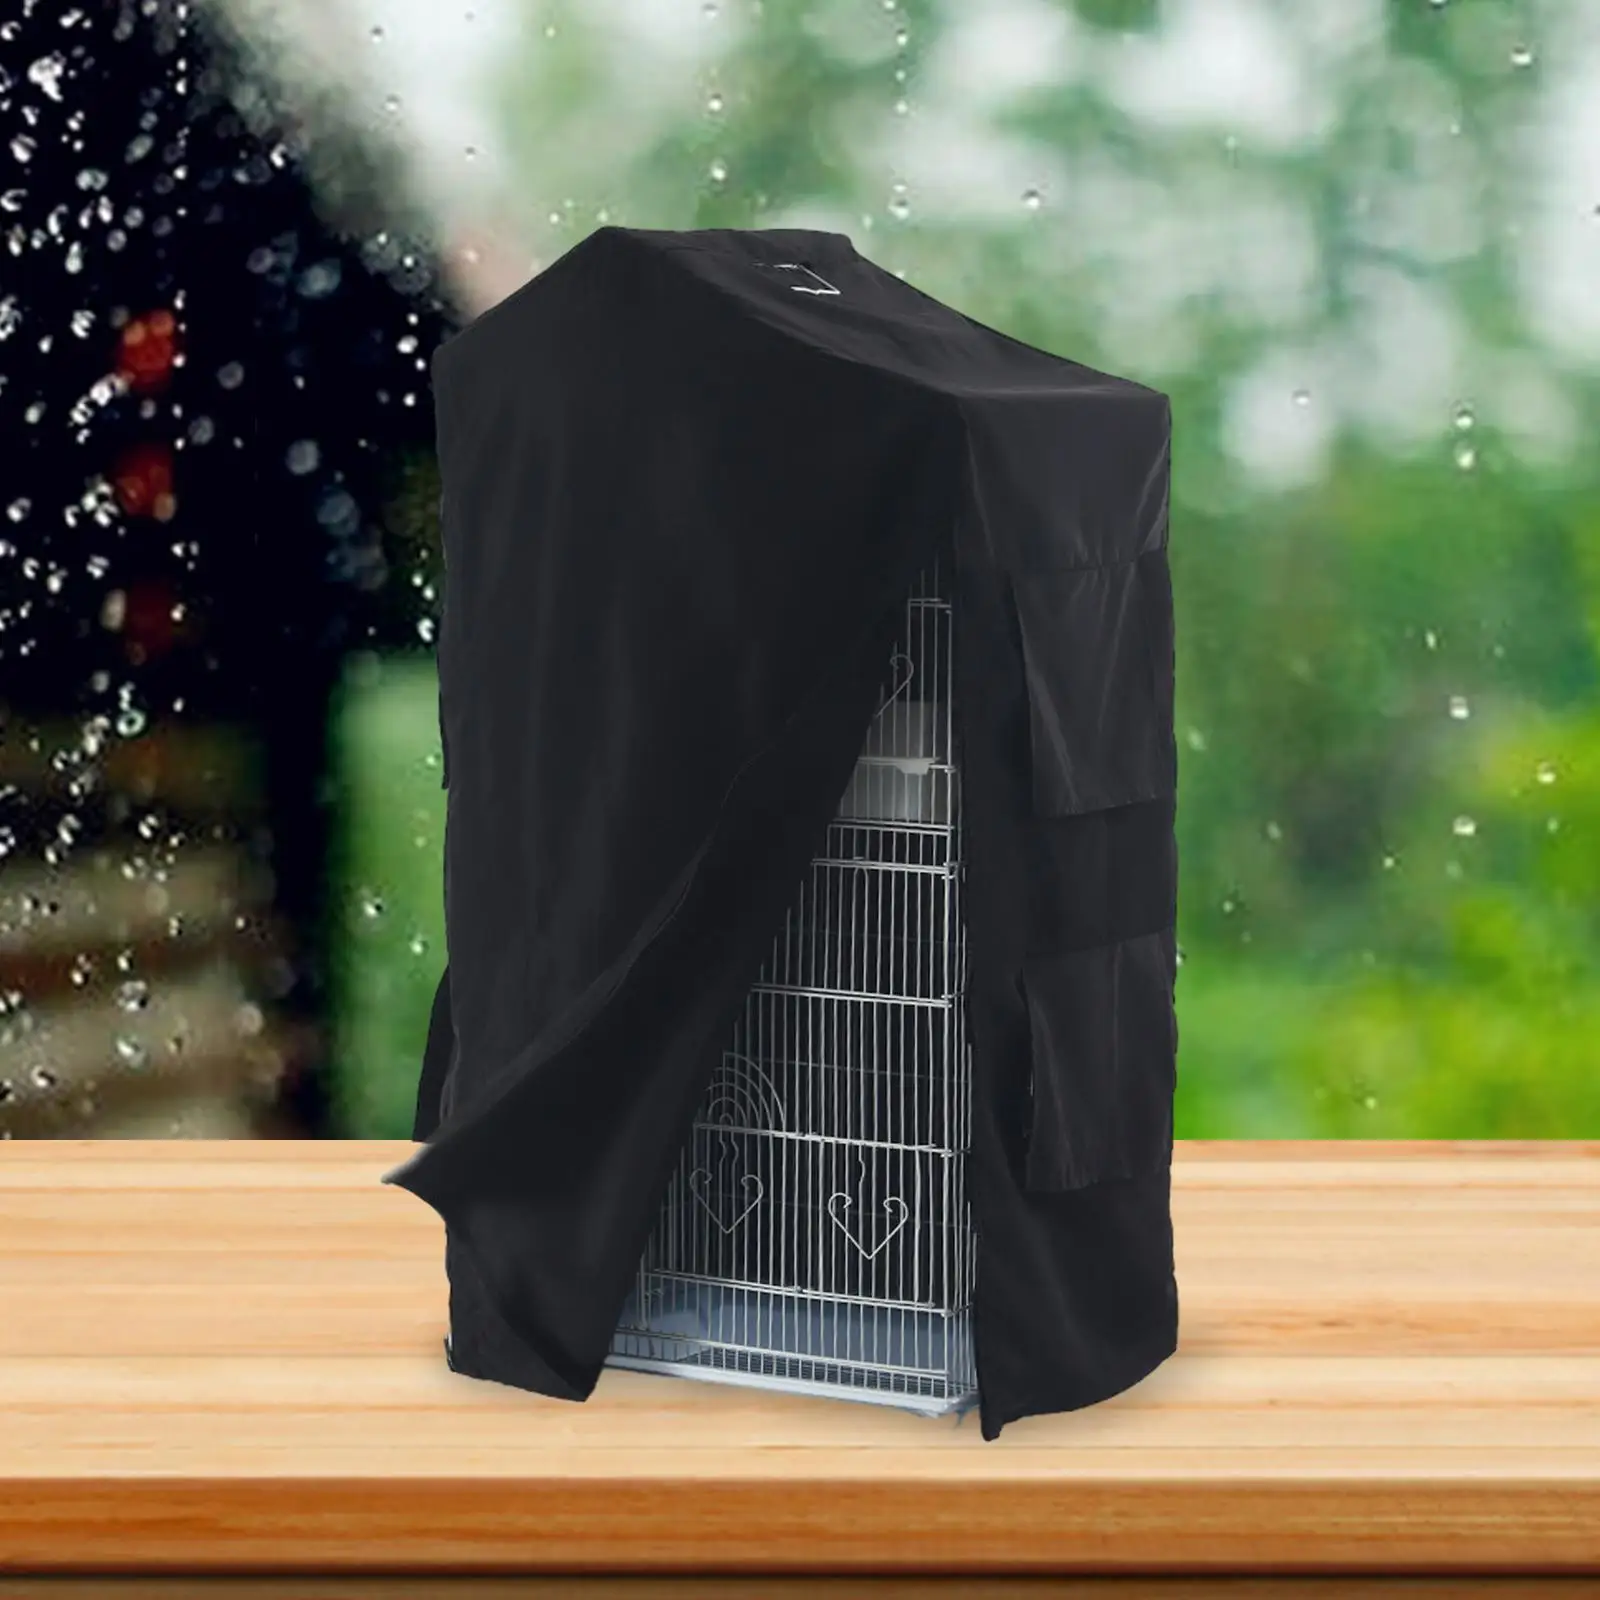 Bird Cage Cover Animal Privacy Breathable Shading Cloth Windproof for Parrot Budgies Lovebirds Parakeets Square Cages